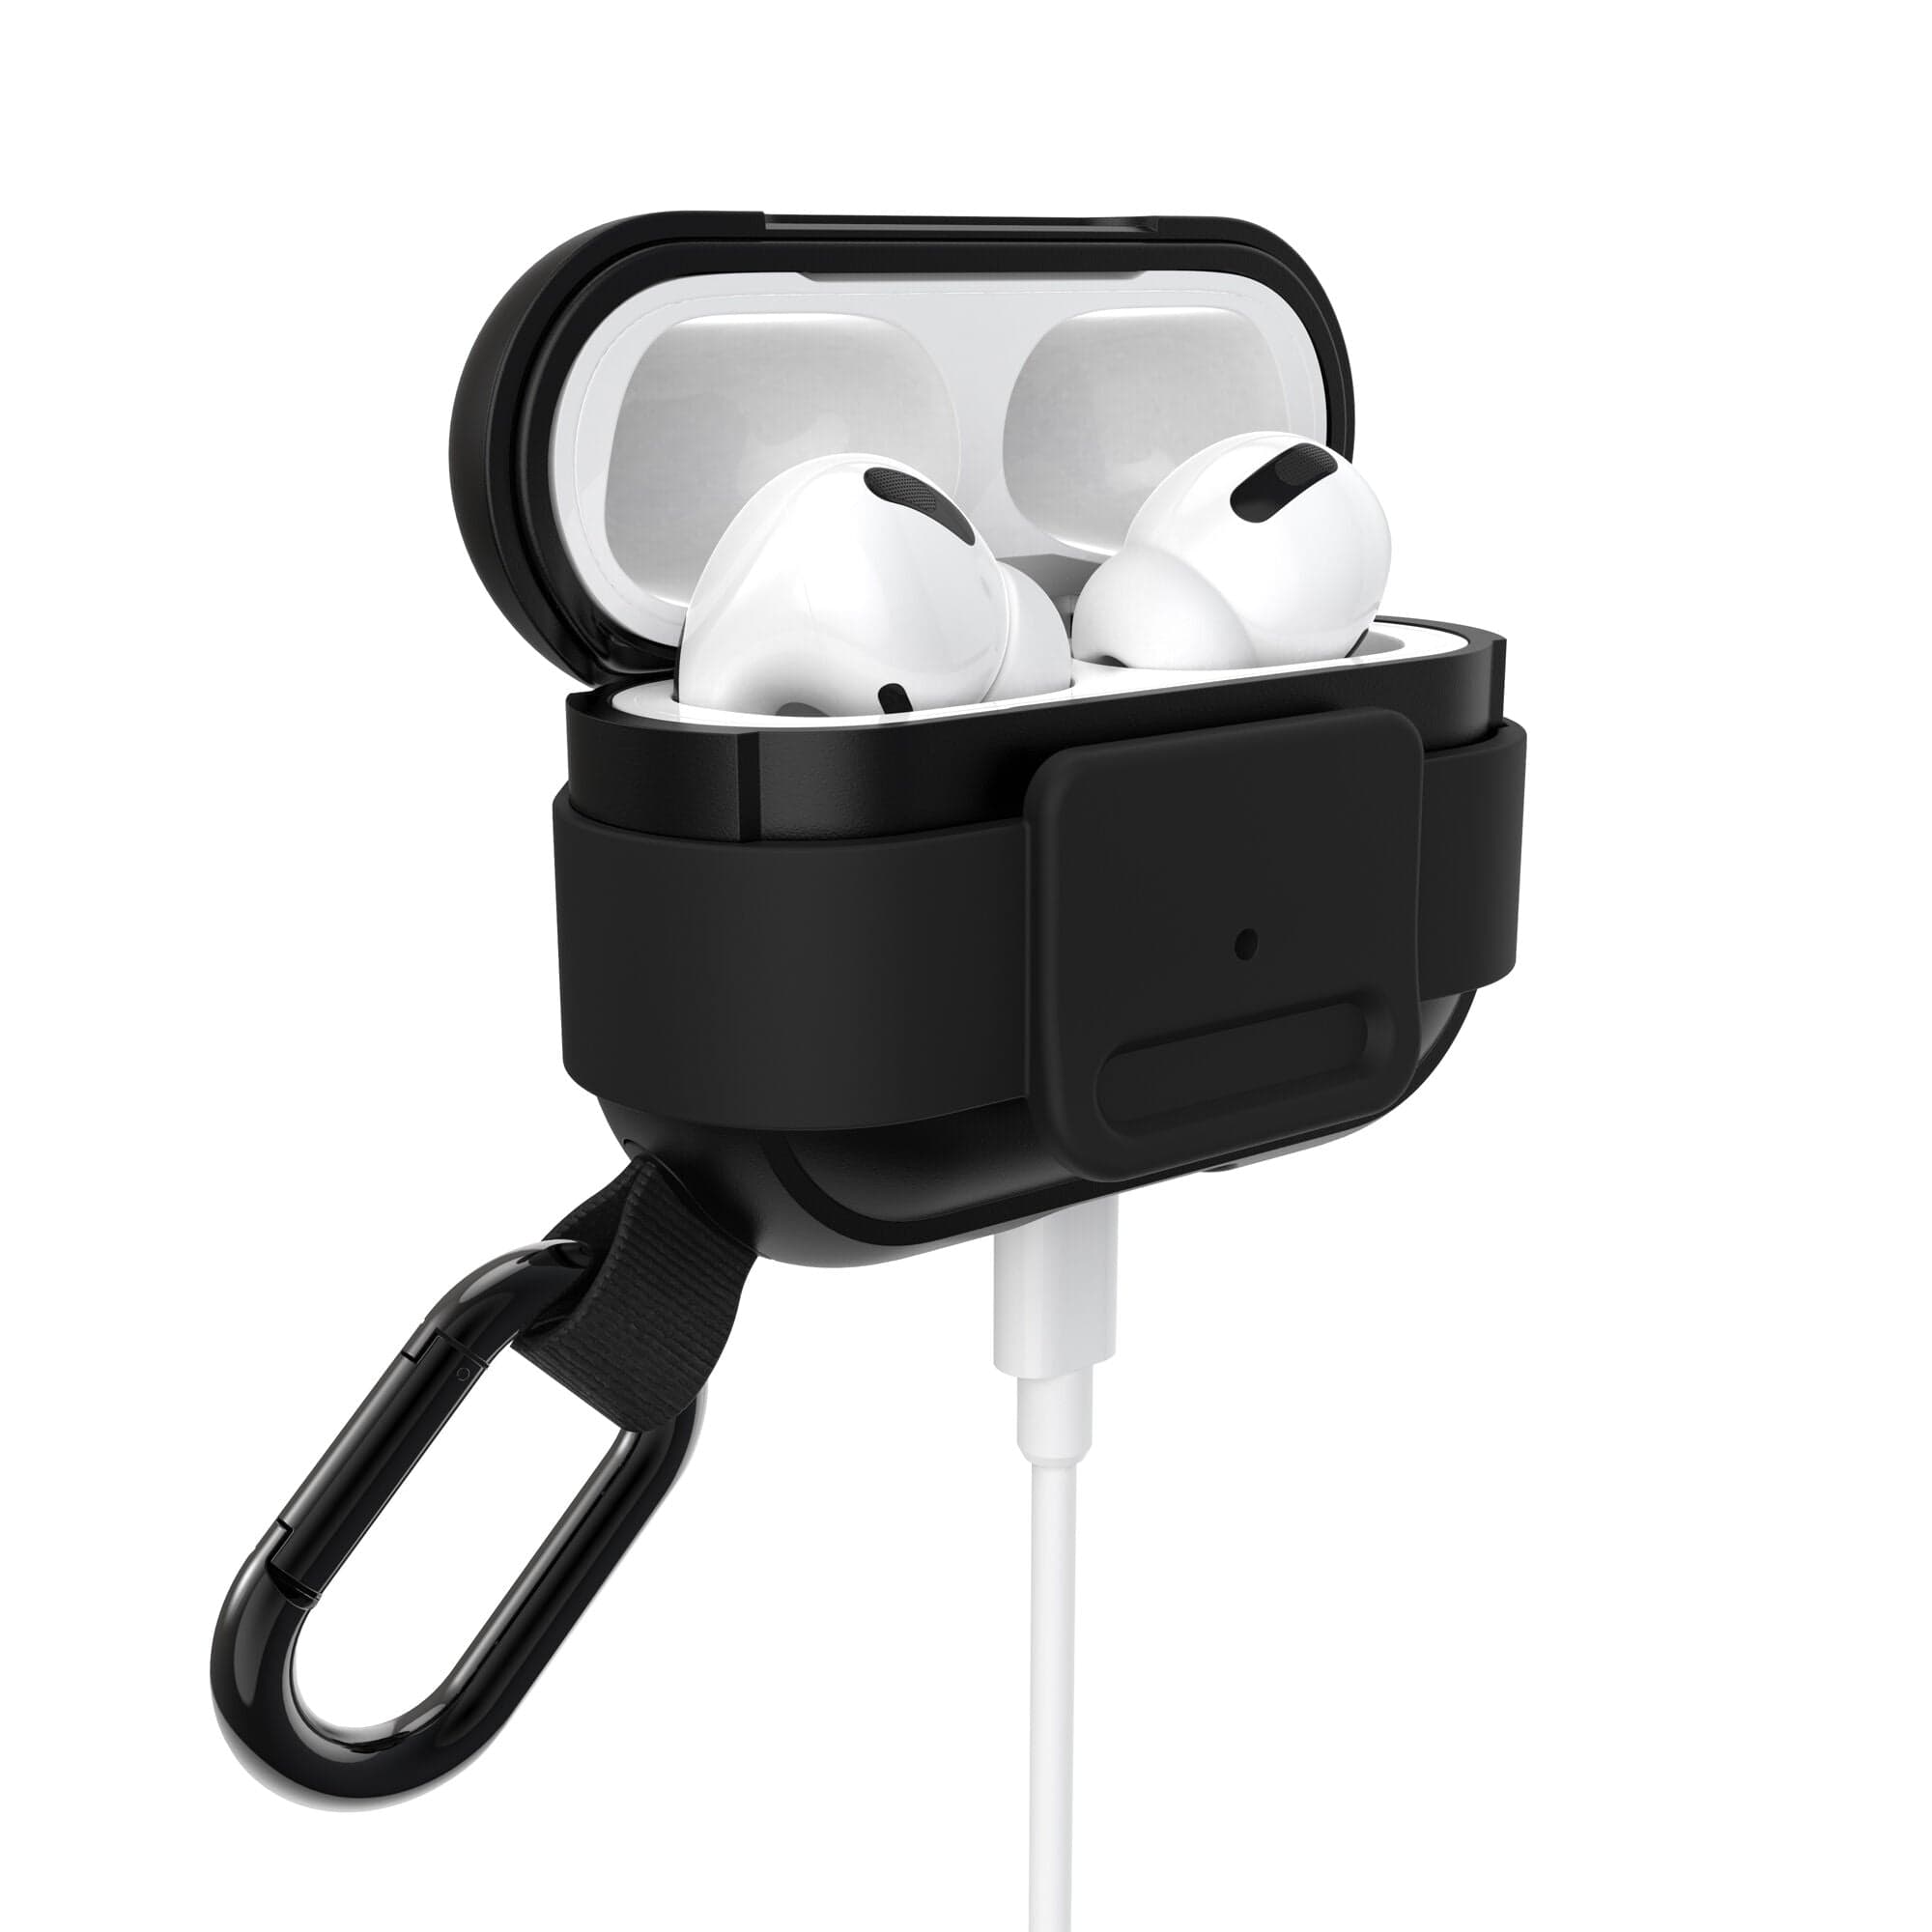 Presidio Clear AirPods Pro (2nd generation) Cases